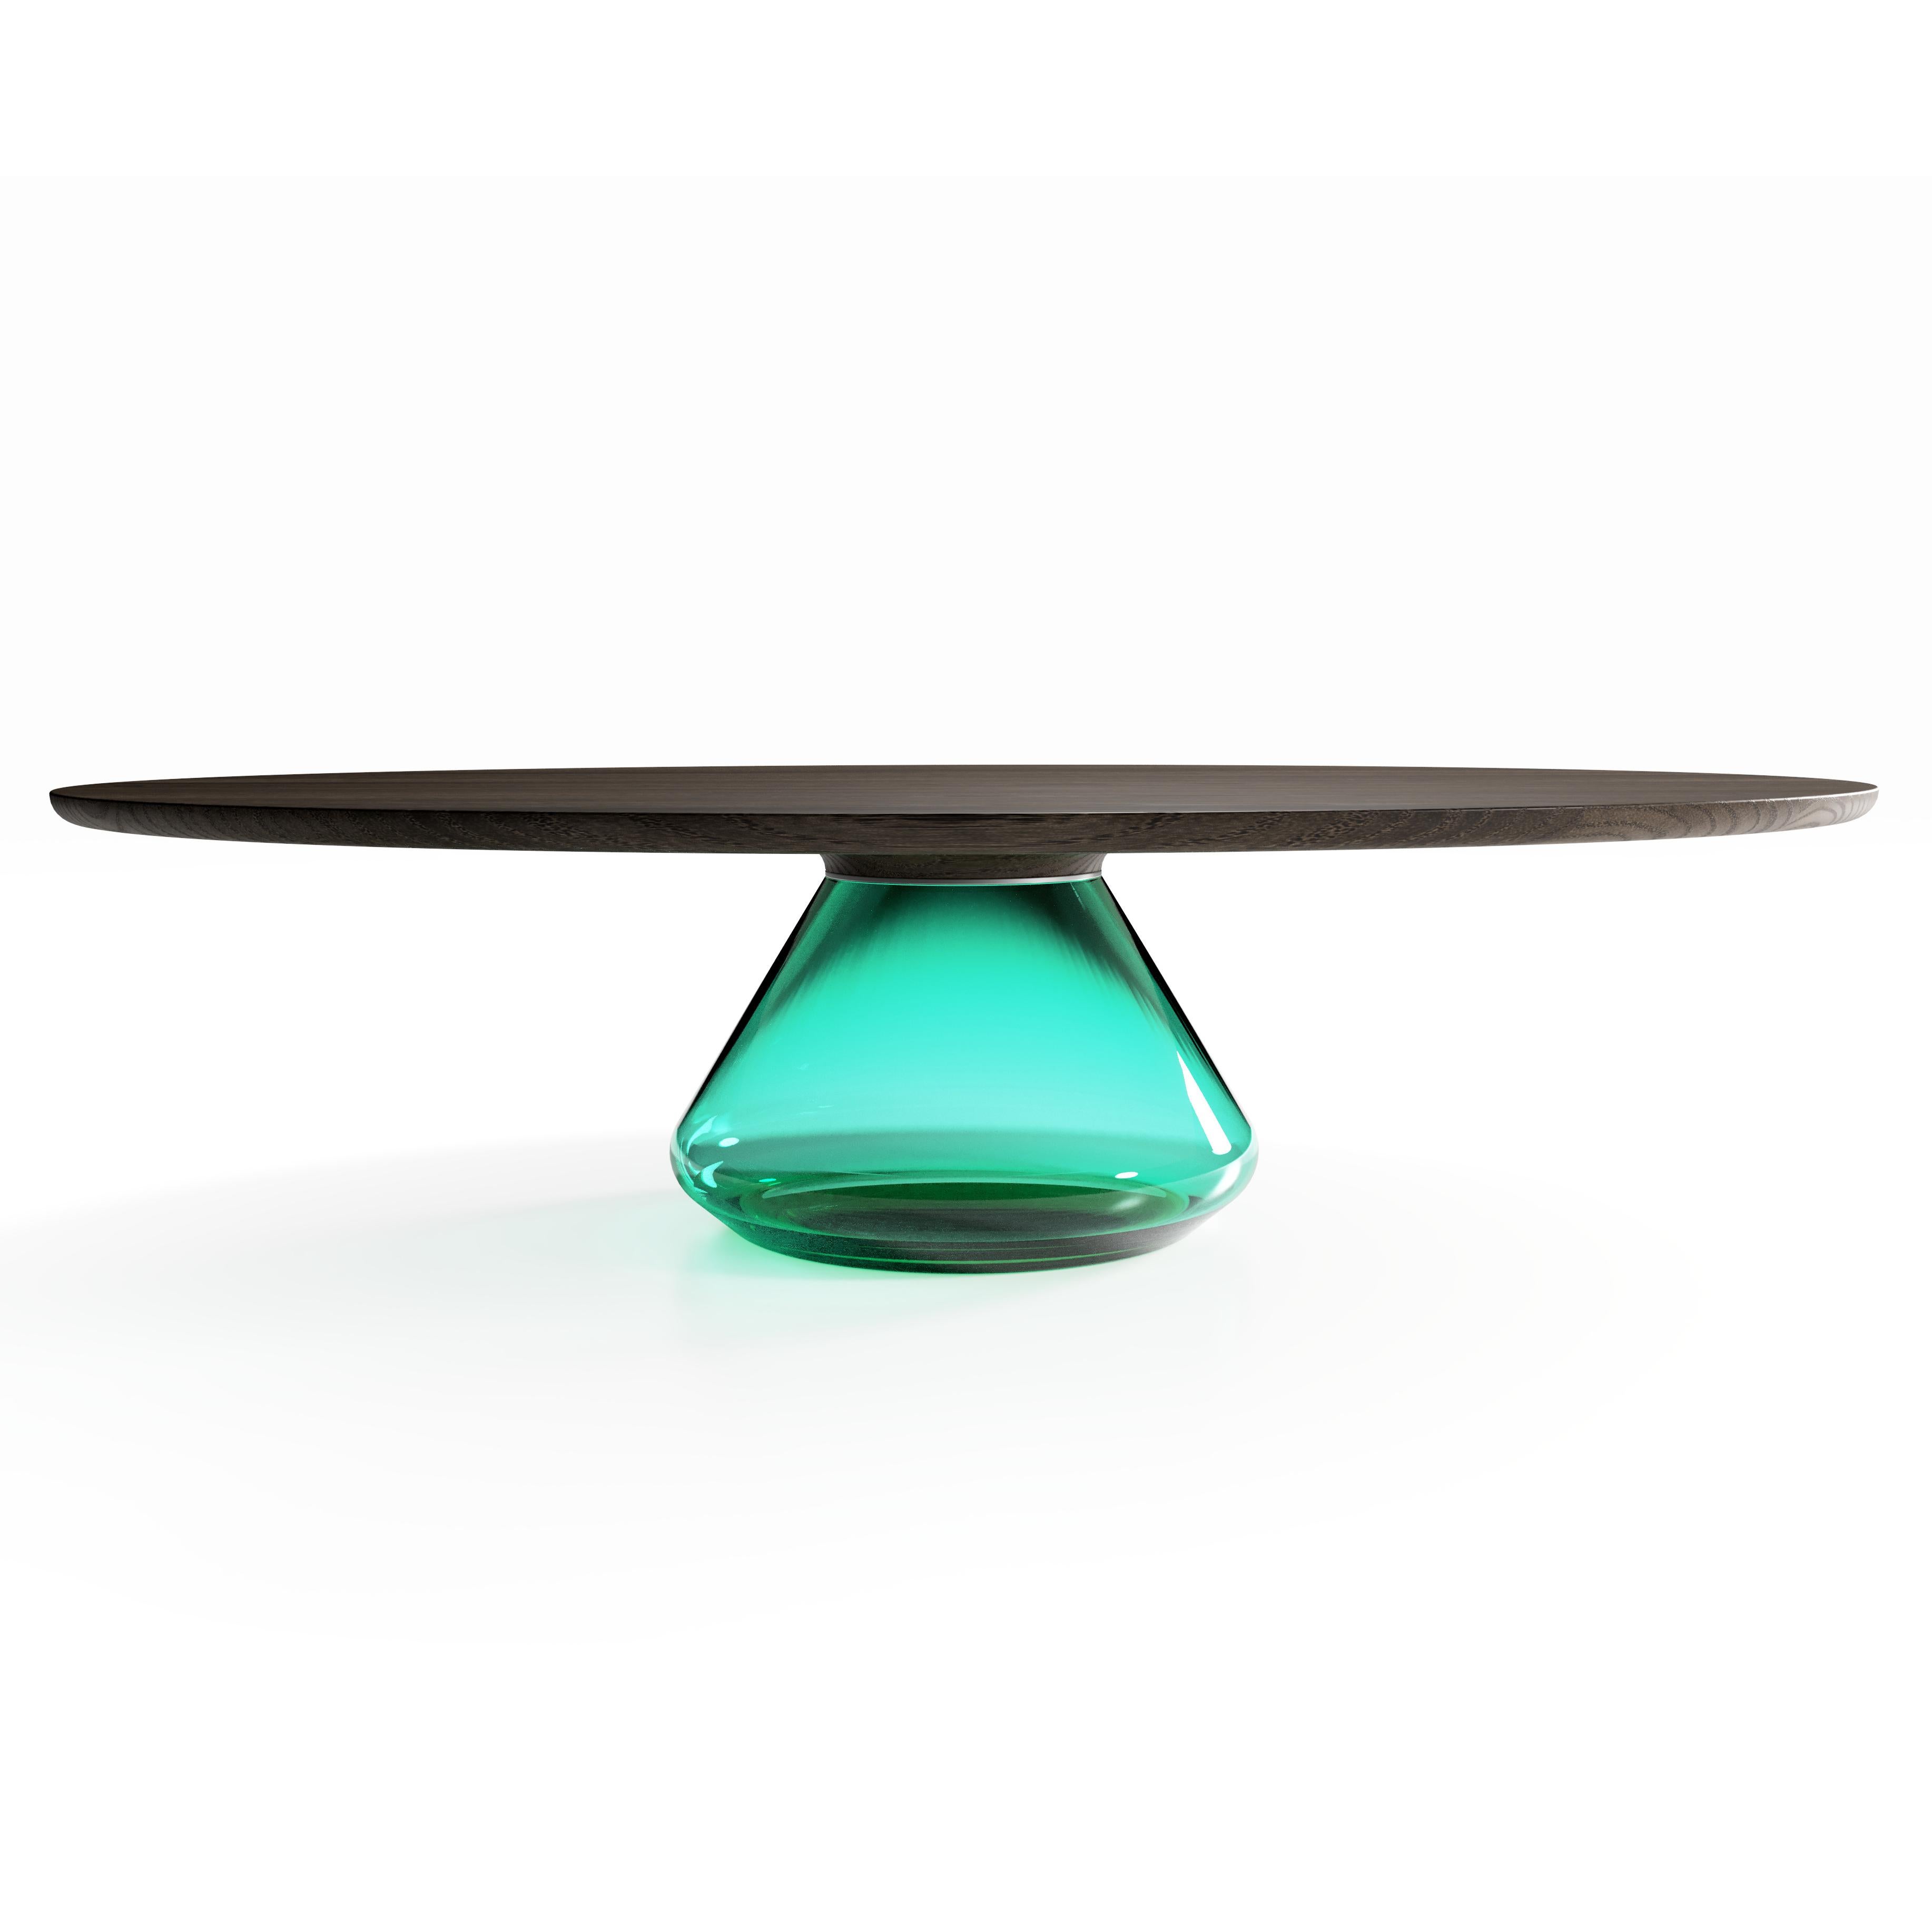 The Emerald Eclipse I, limited edition coffee table by Grzegorz Majka
Limited Edition of 8
Dimensions: 54 x 48 x 14 in
Materials: Glass, oak

The total eclipse of every interior? With this amazing table everything is possible as with its Minimalist